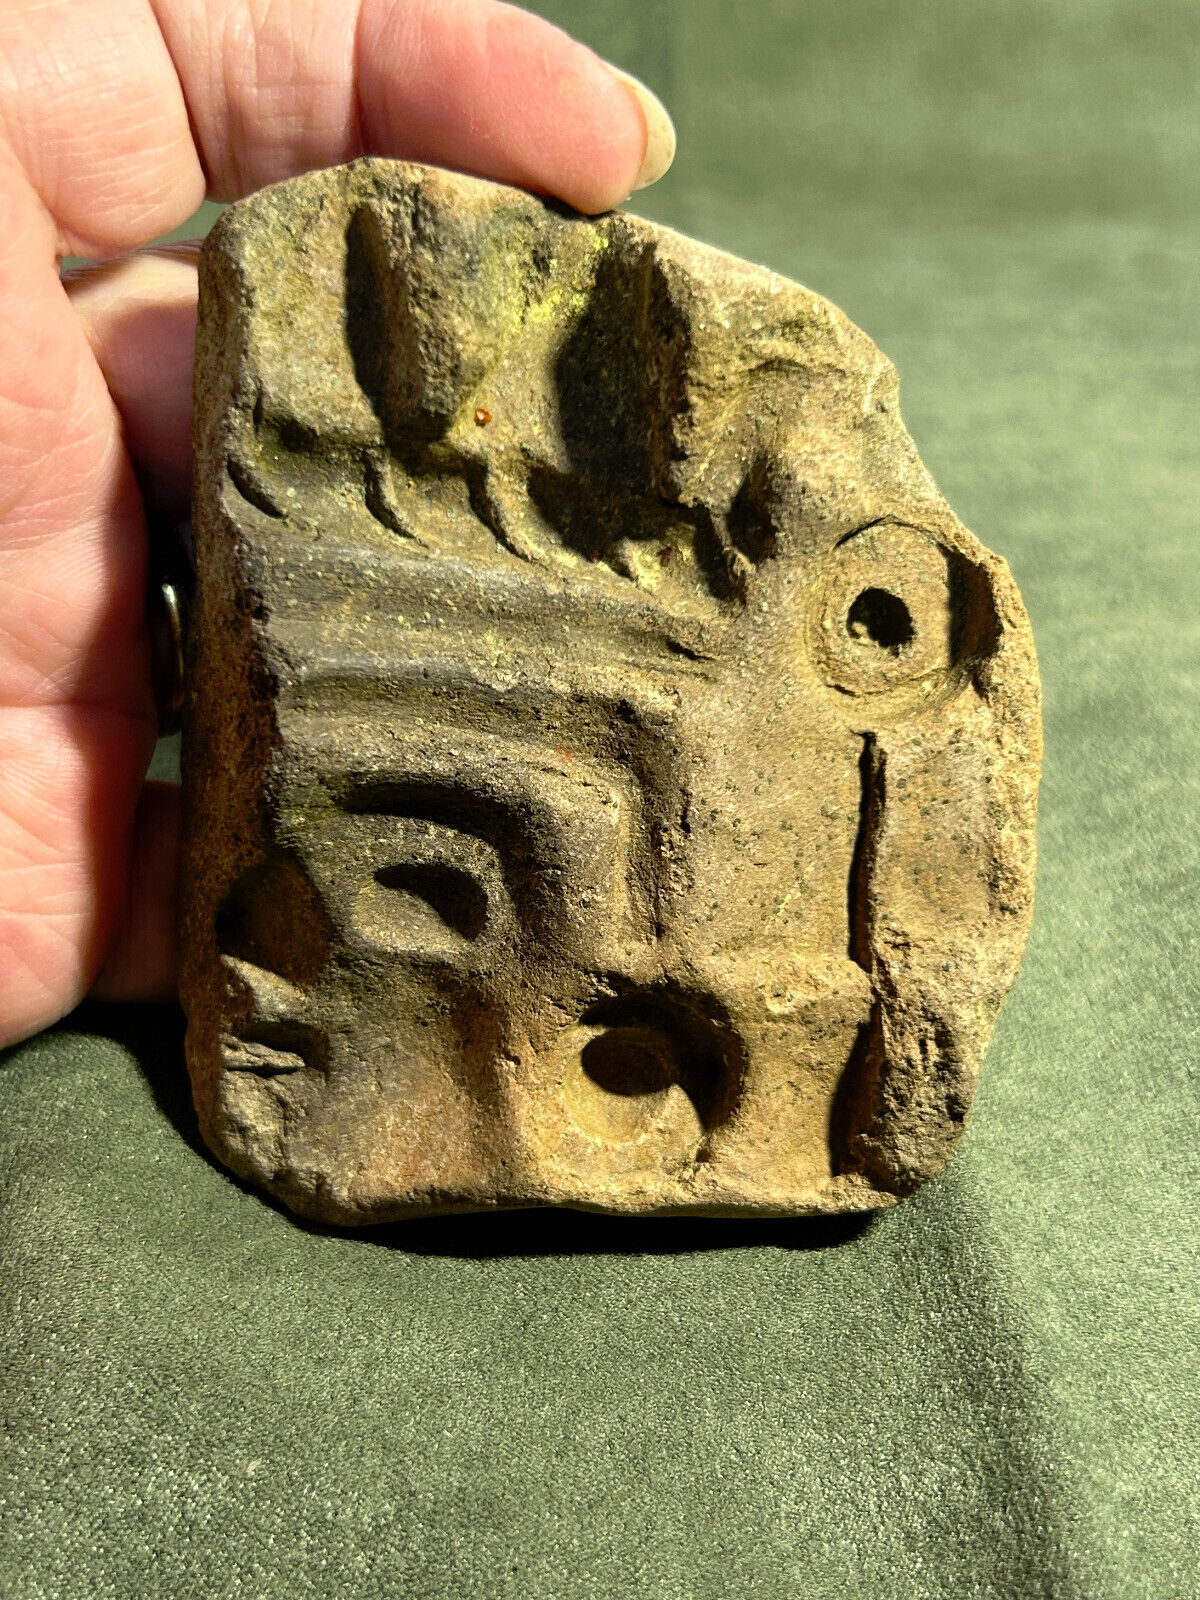 PRE COLUMBIAN CARVING FRAGMENT - STONE